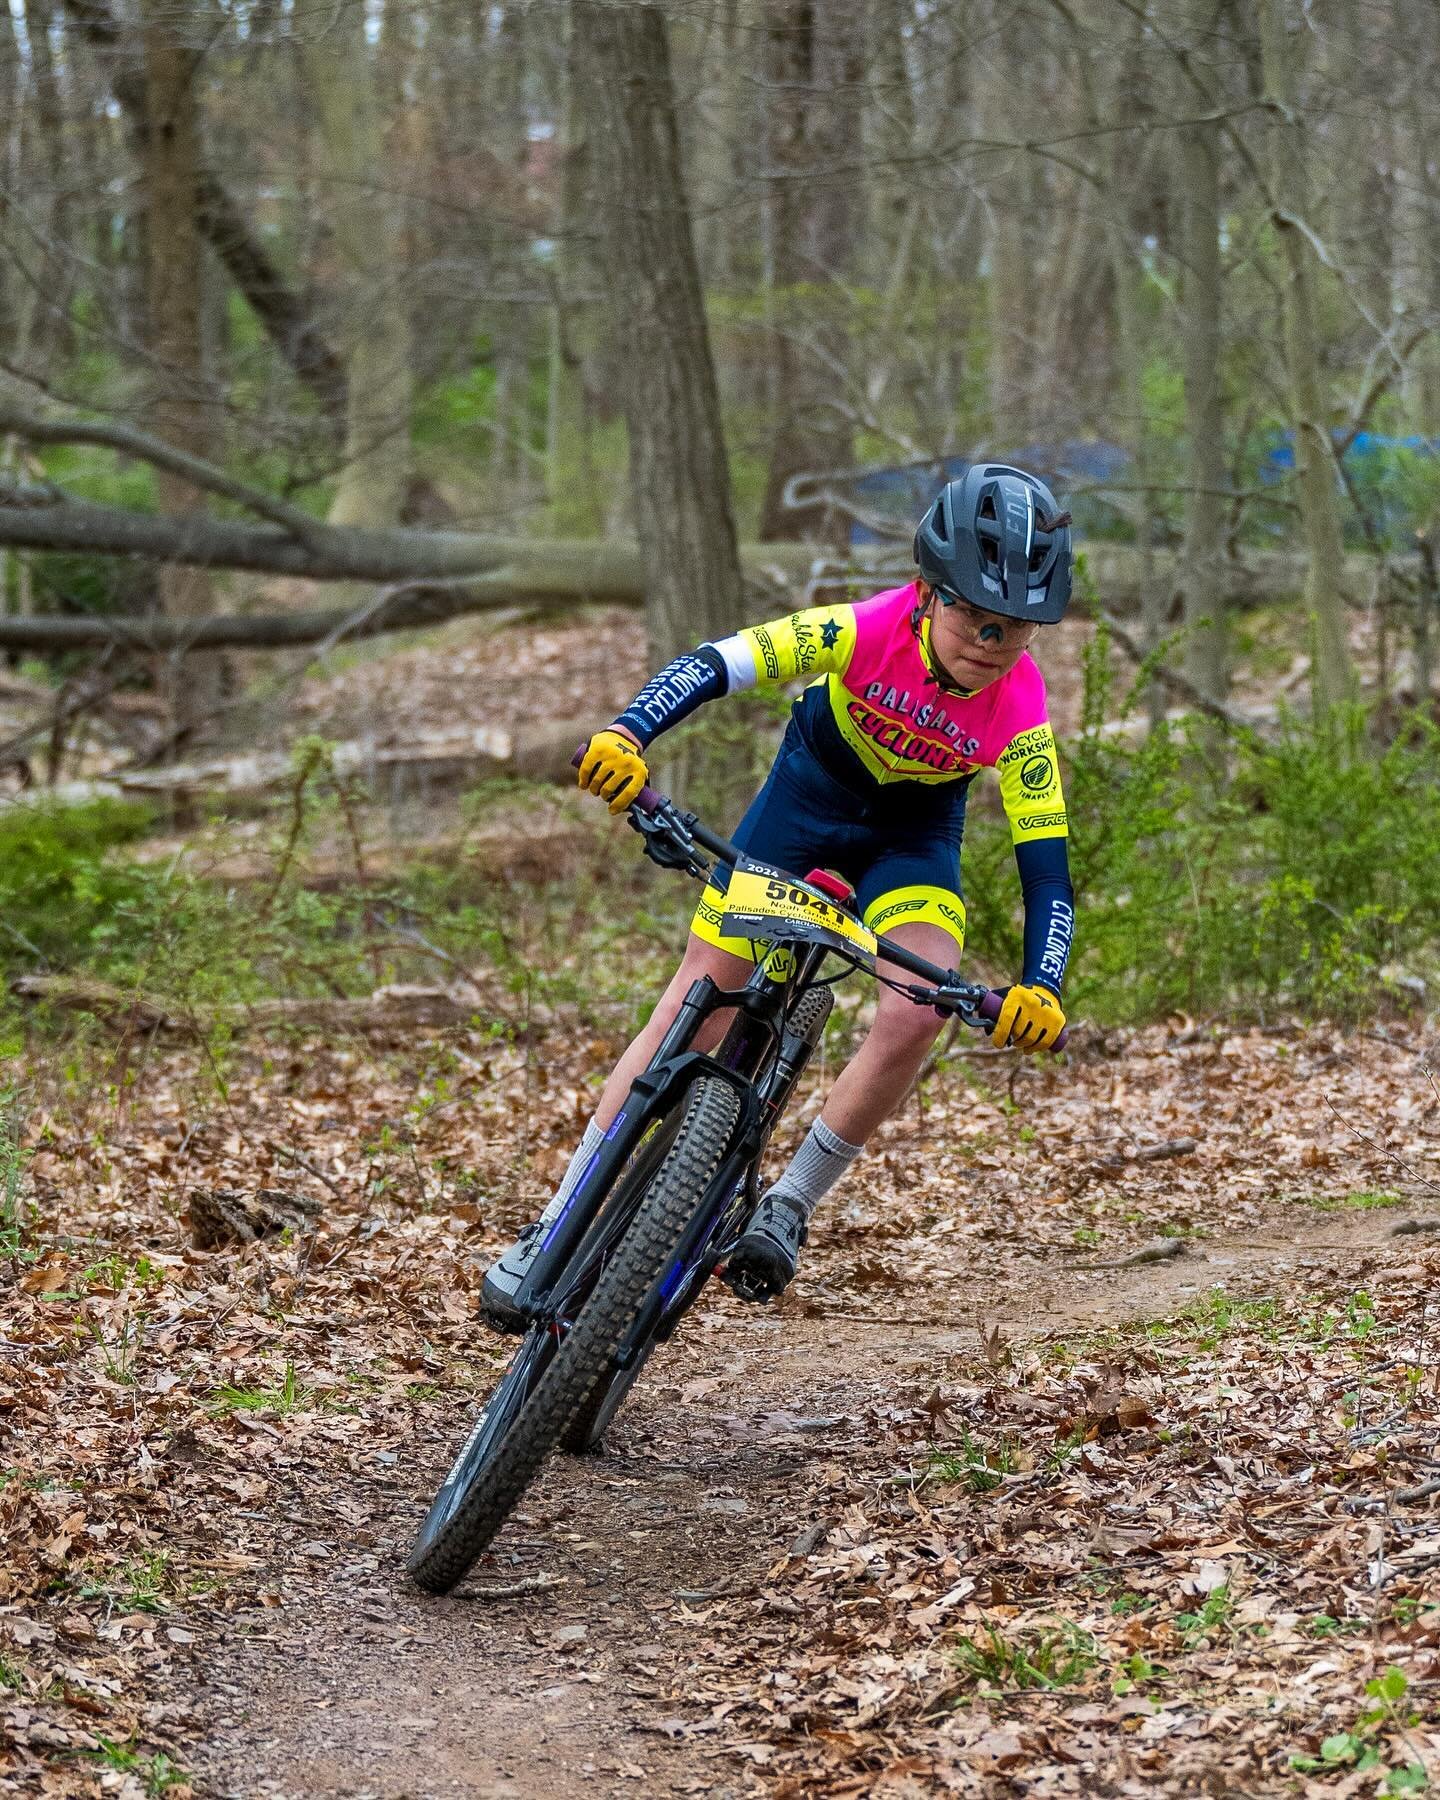 Shoutout to @mtb_nomo for moving up the standings every race. Noah says &ldquo;it&rsquo;s not about winning, it&rsquo;s about riding hard and digging&rdquo;
@palisades_cyclones @palisadesmtb @nicanewjersey @doublestarcoaching 
.
.
.
#bikesdoneright #